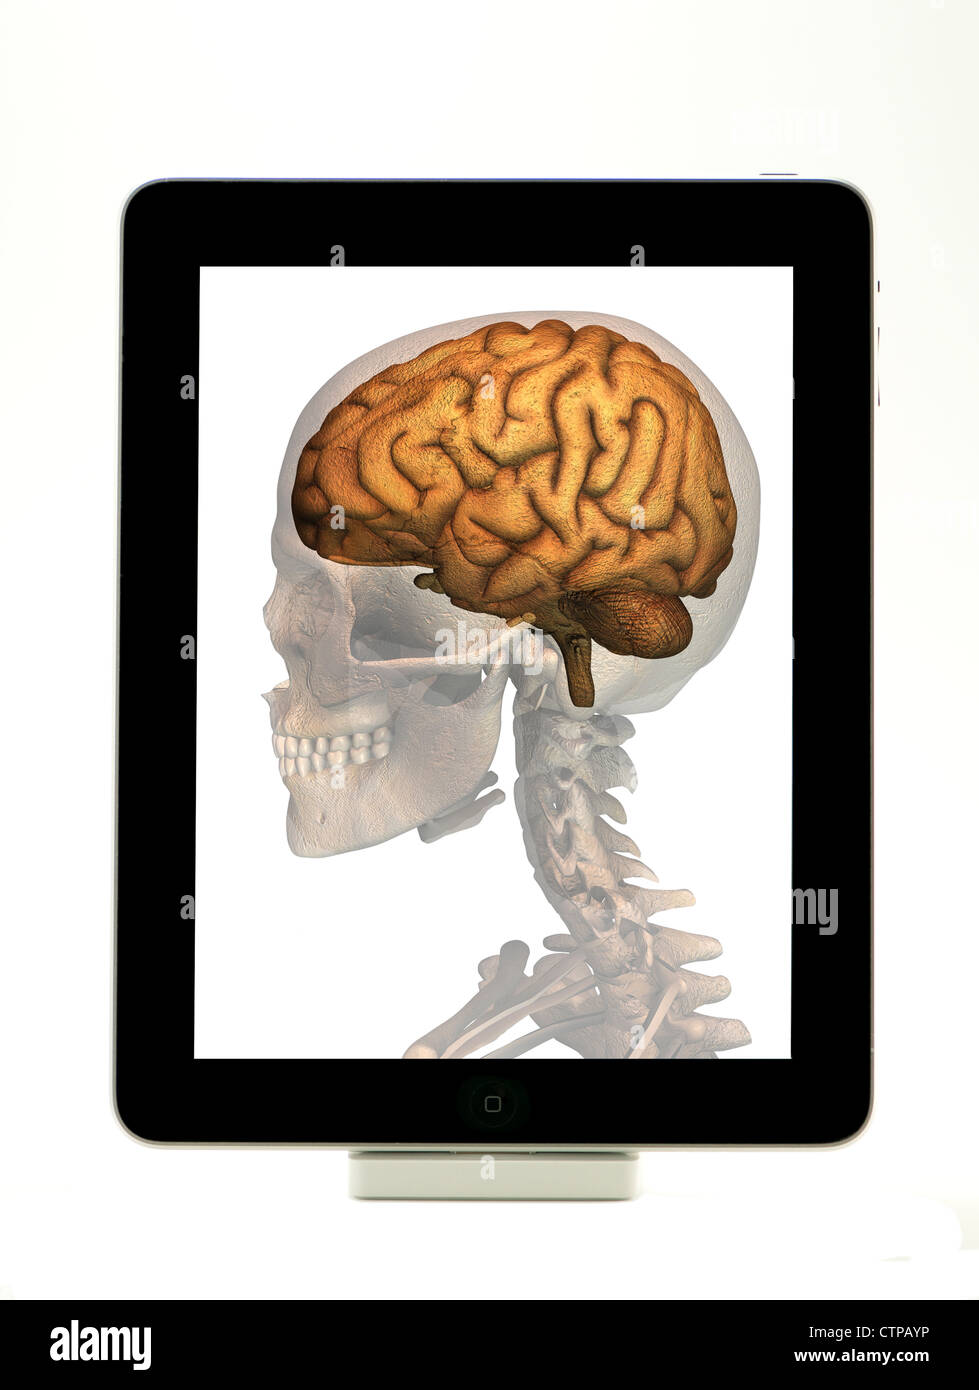 Tablet computer with an illustration of the human brain Stock Photo